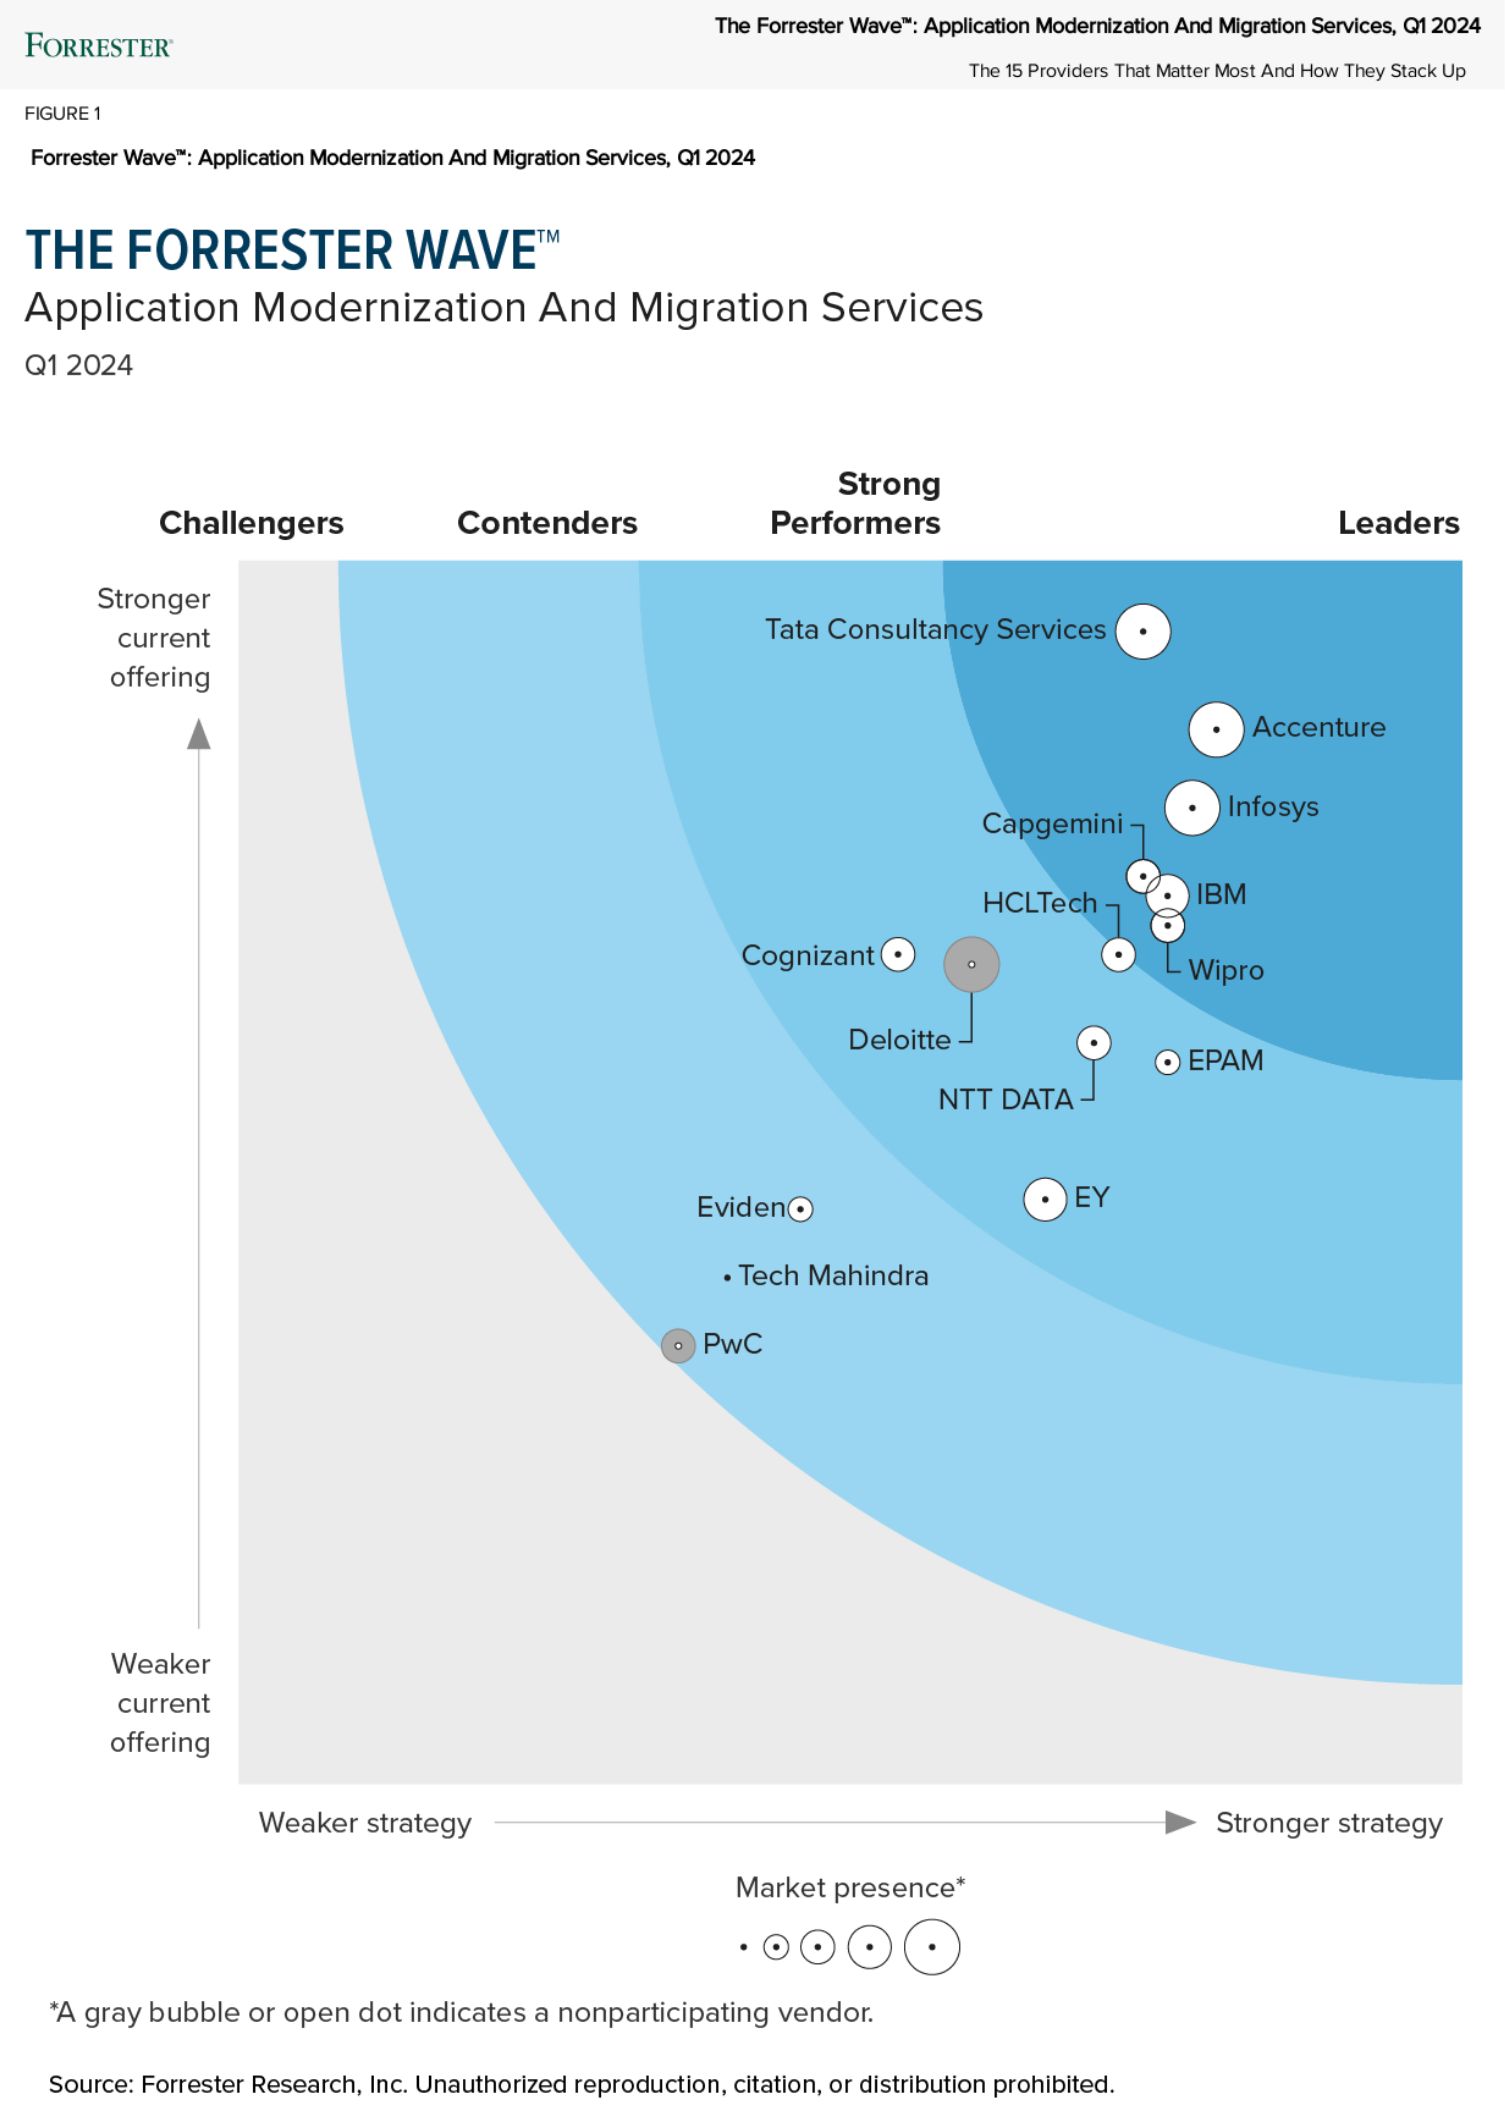 Wipro Positioned as a Leader in The Forrester Wave™: Application Modernization and Migration Services, Q1 2024